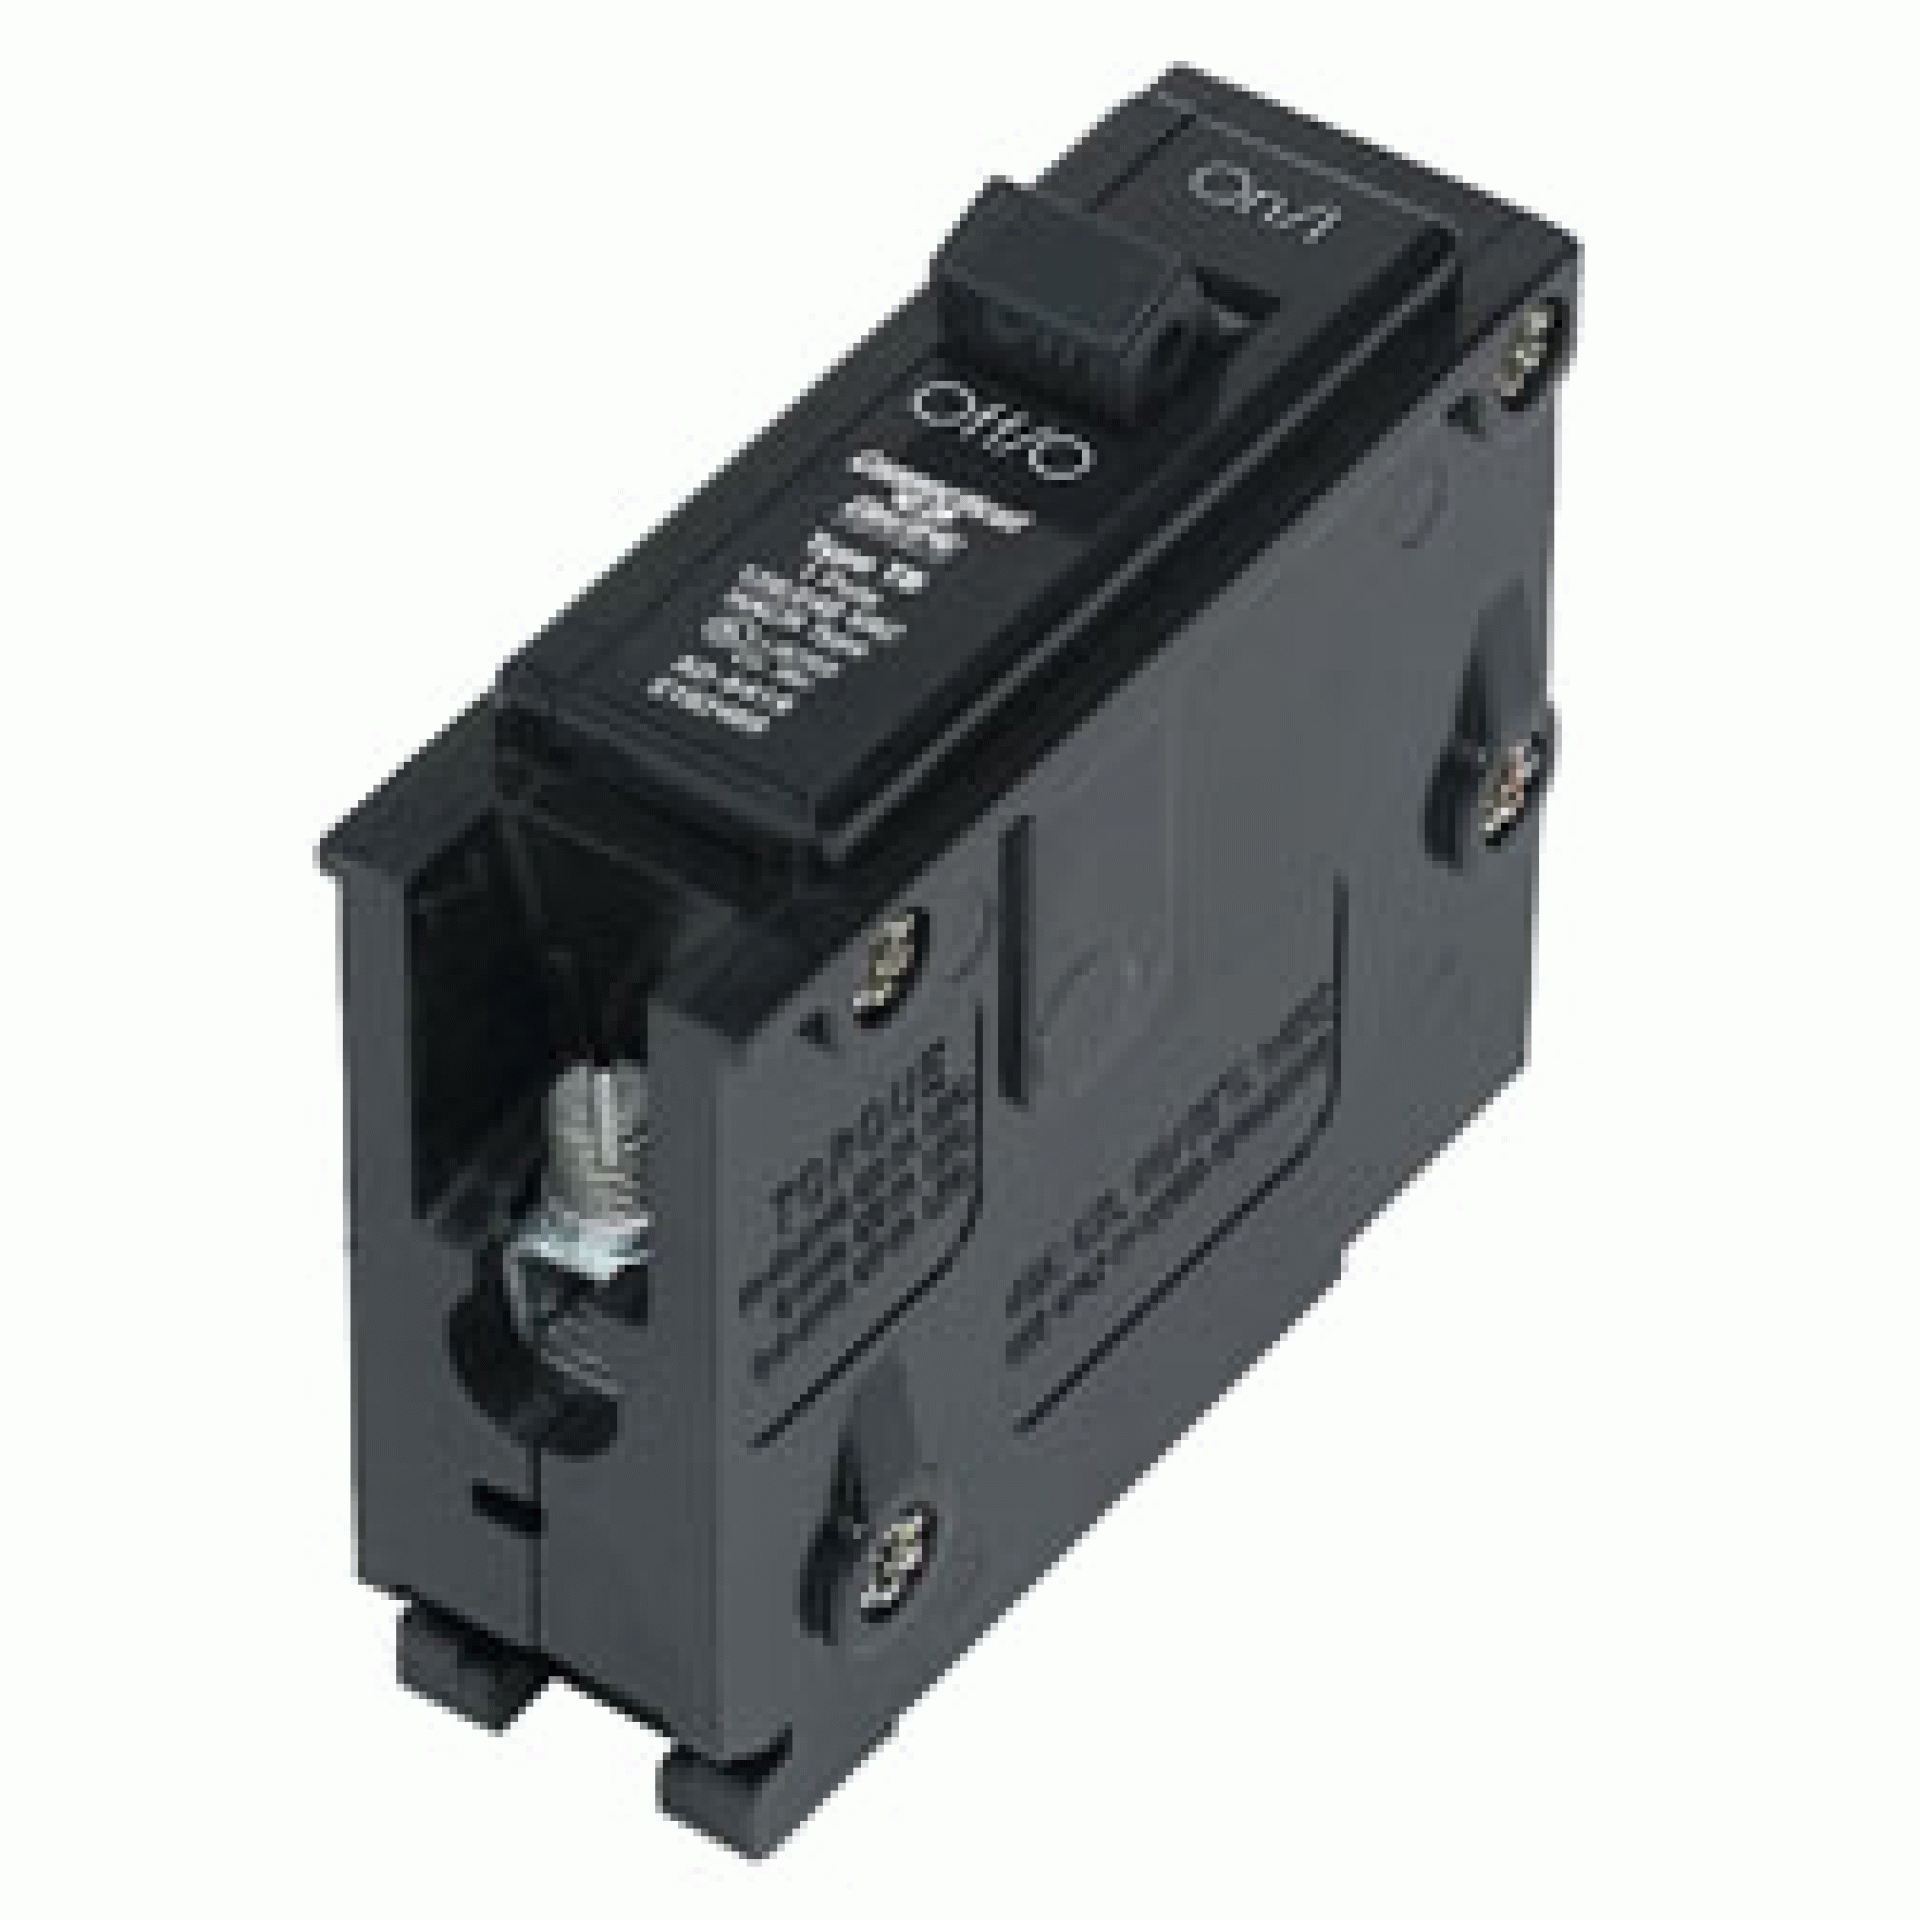 PARALLAX POWER SUPPLY | ITEQ140 | CIRCUIT BREAKER ONE POLE 40 AMP